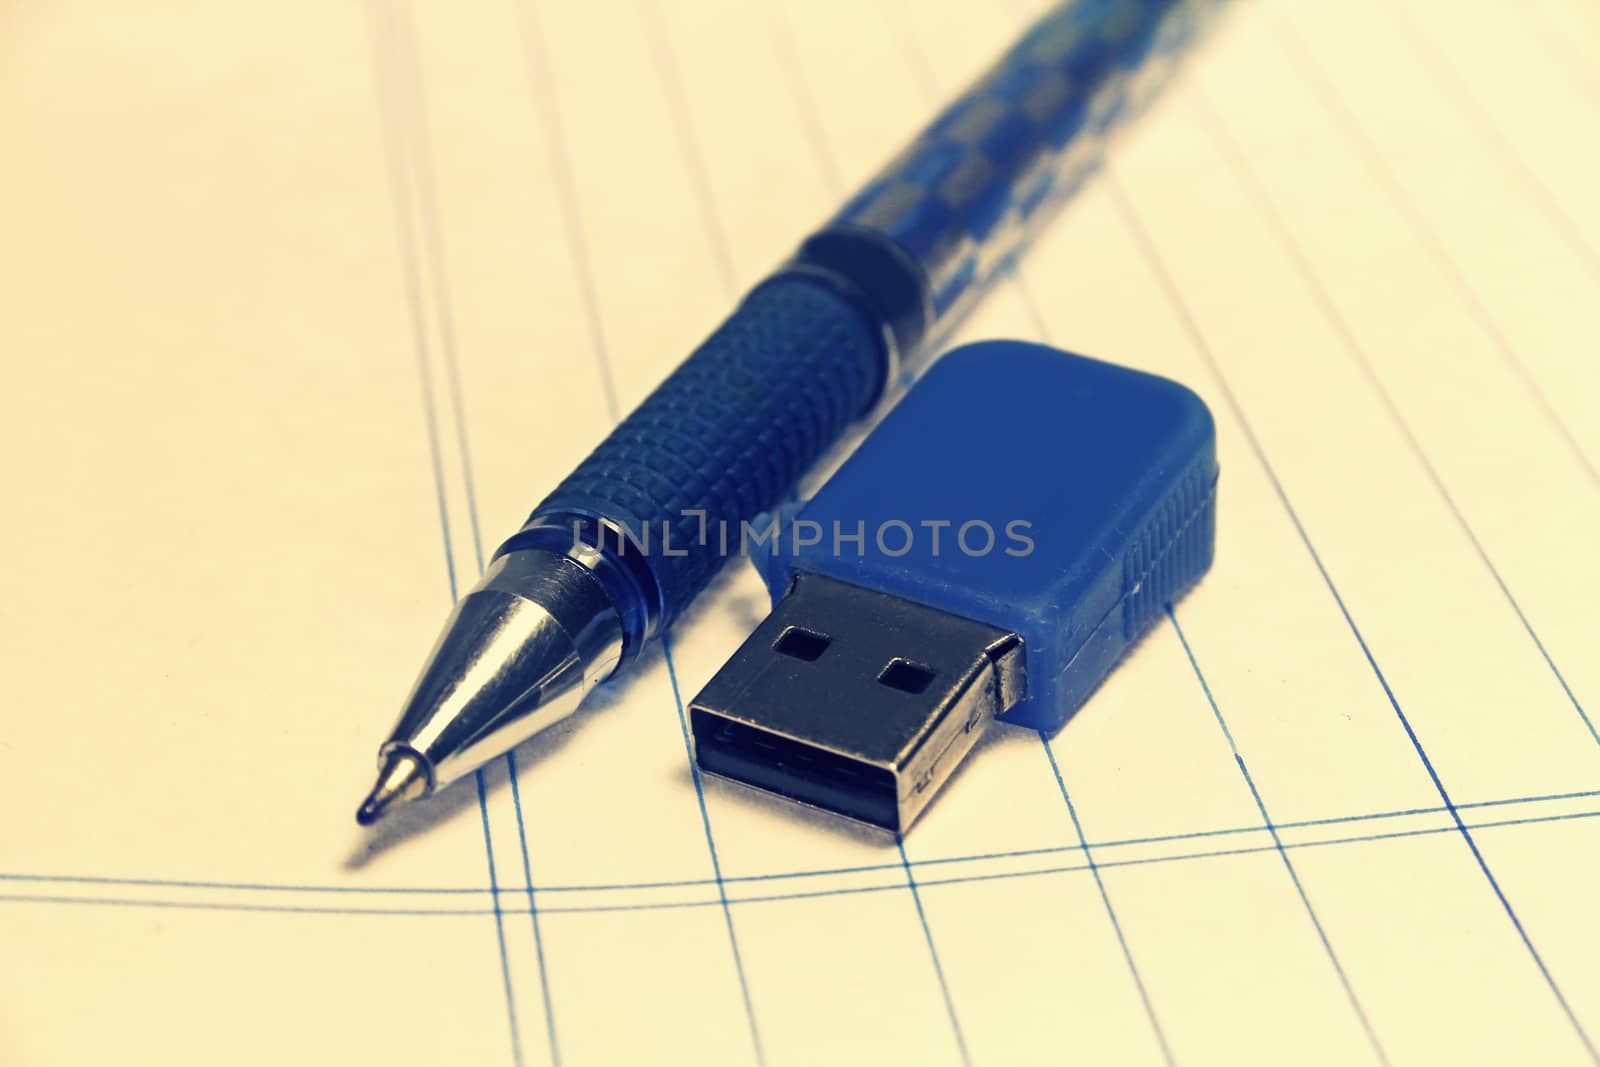 Pen Drive and Pen, Work Tools by yands